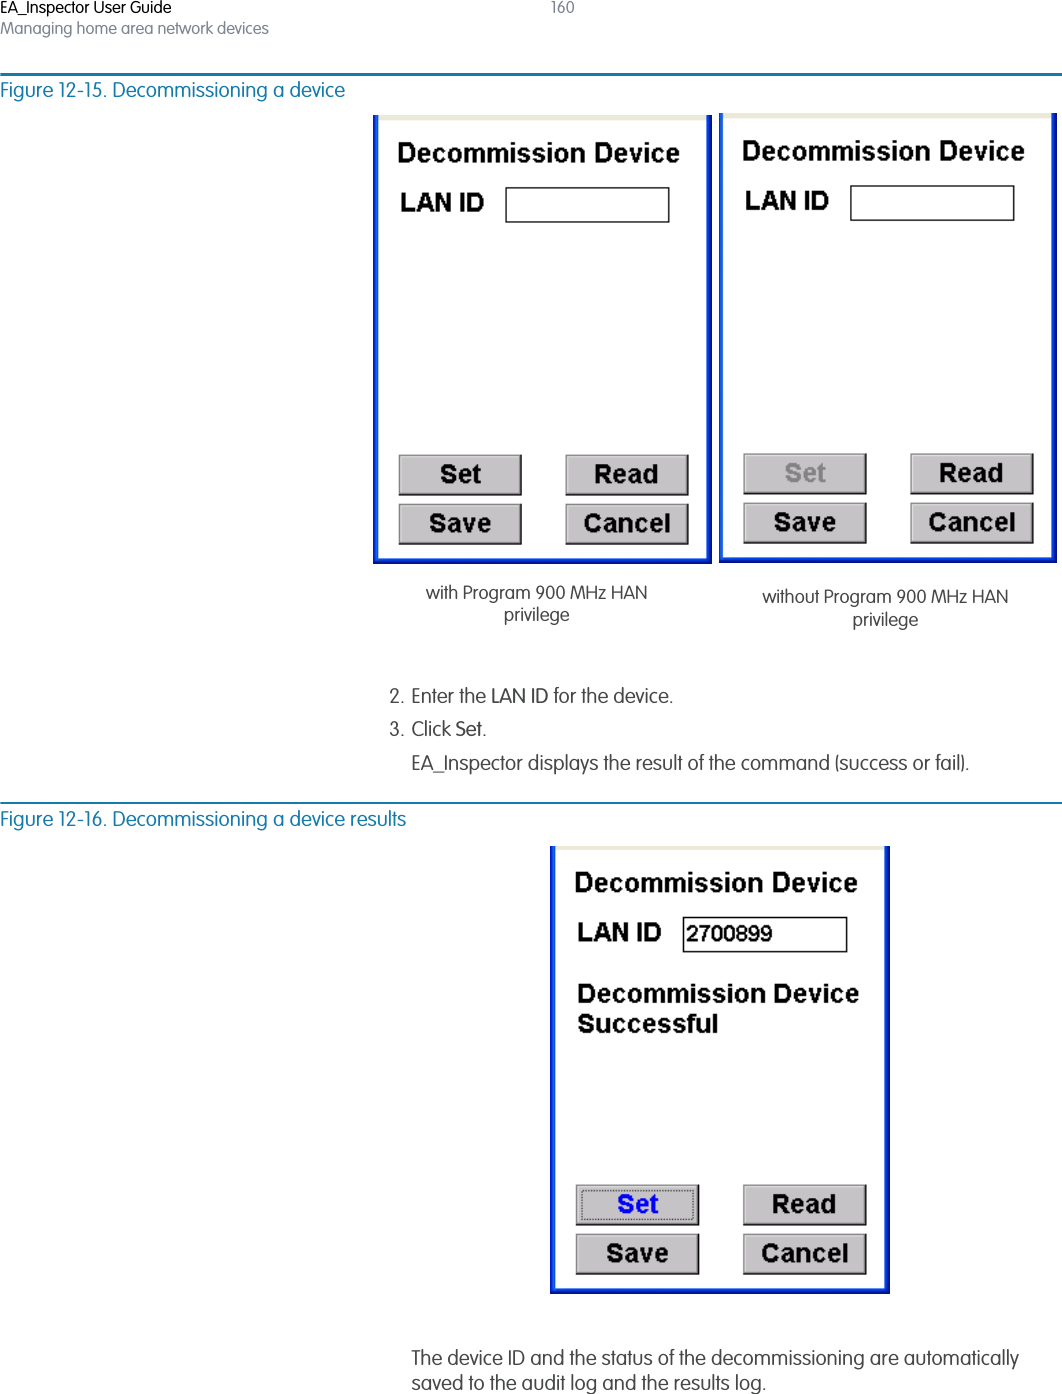 EA_Inspector User GuideManaging home area network devices160Figure 12-15. Decommissioning a device2. Enter the LAN ID for the device.3. Click Set.EA_Inspector displays the result of the command (success or fail).Figure 12-16. Decommissioning a device resultsThe device ID and the status of the decommissioning are automatically saved to the audit log and the results log.with Program 900 MHz HANprivilege without Program 900 MHz HANprivilege